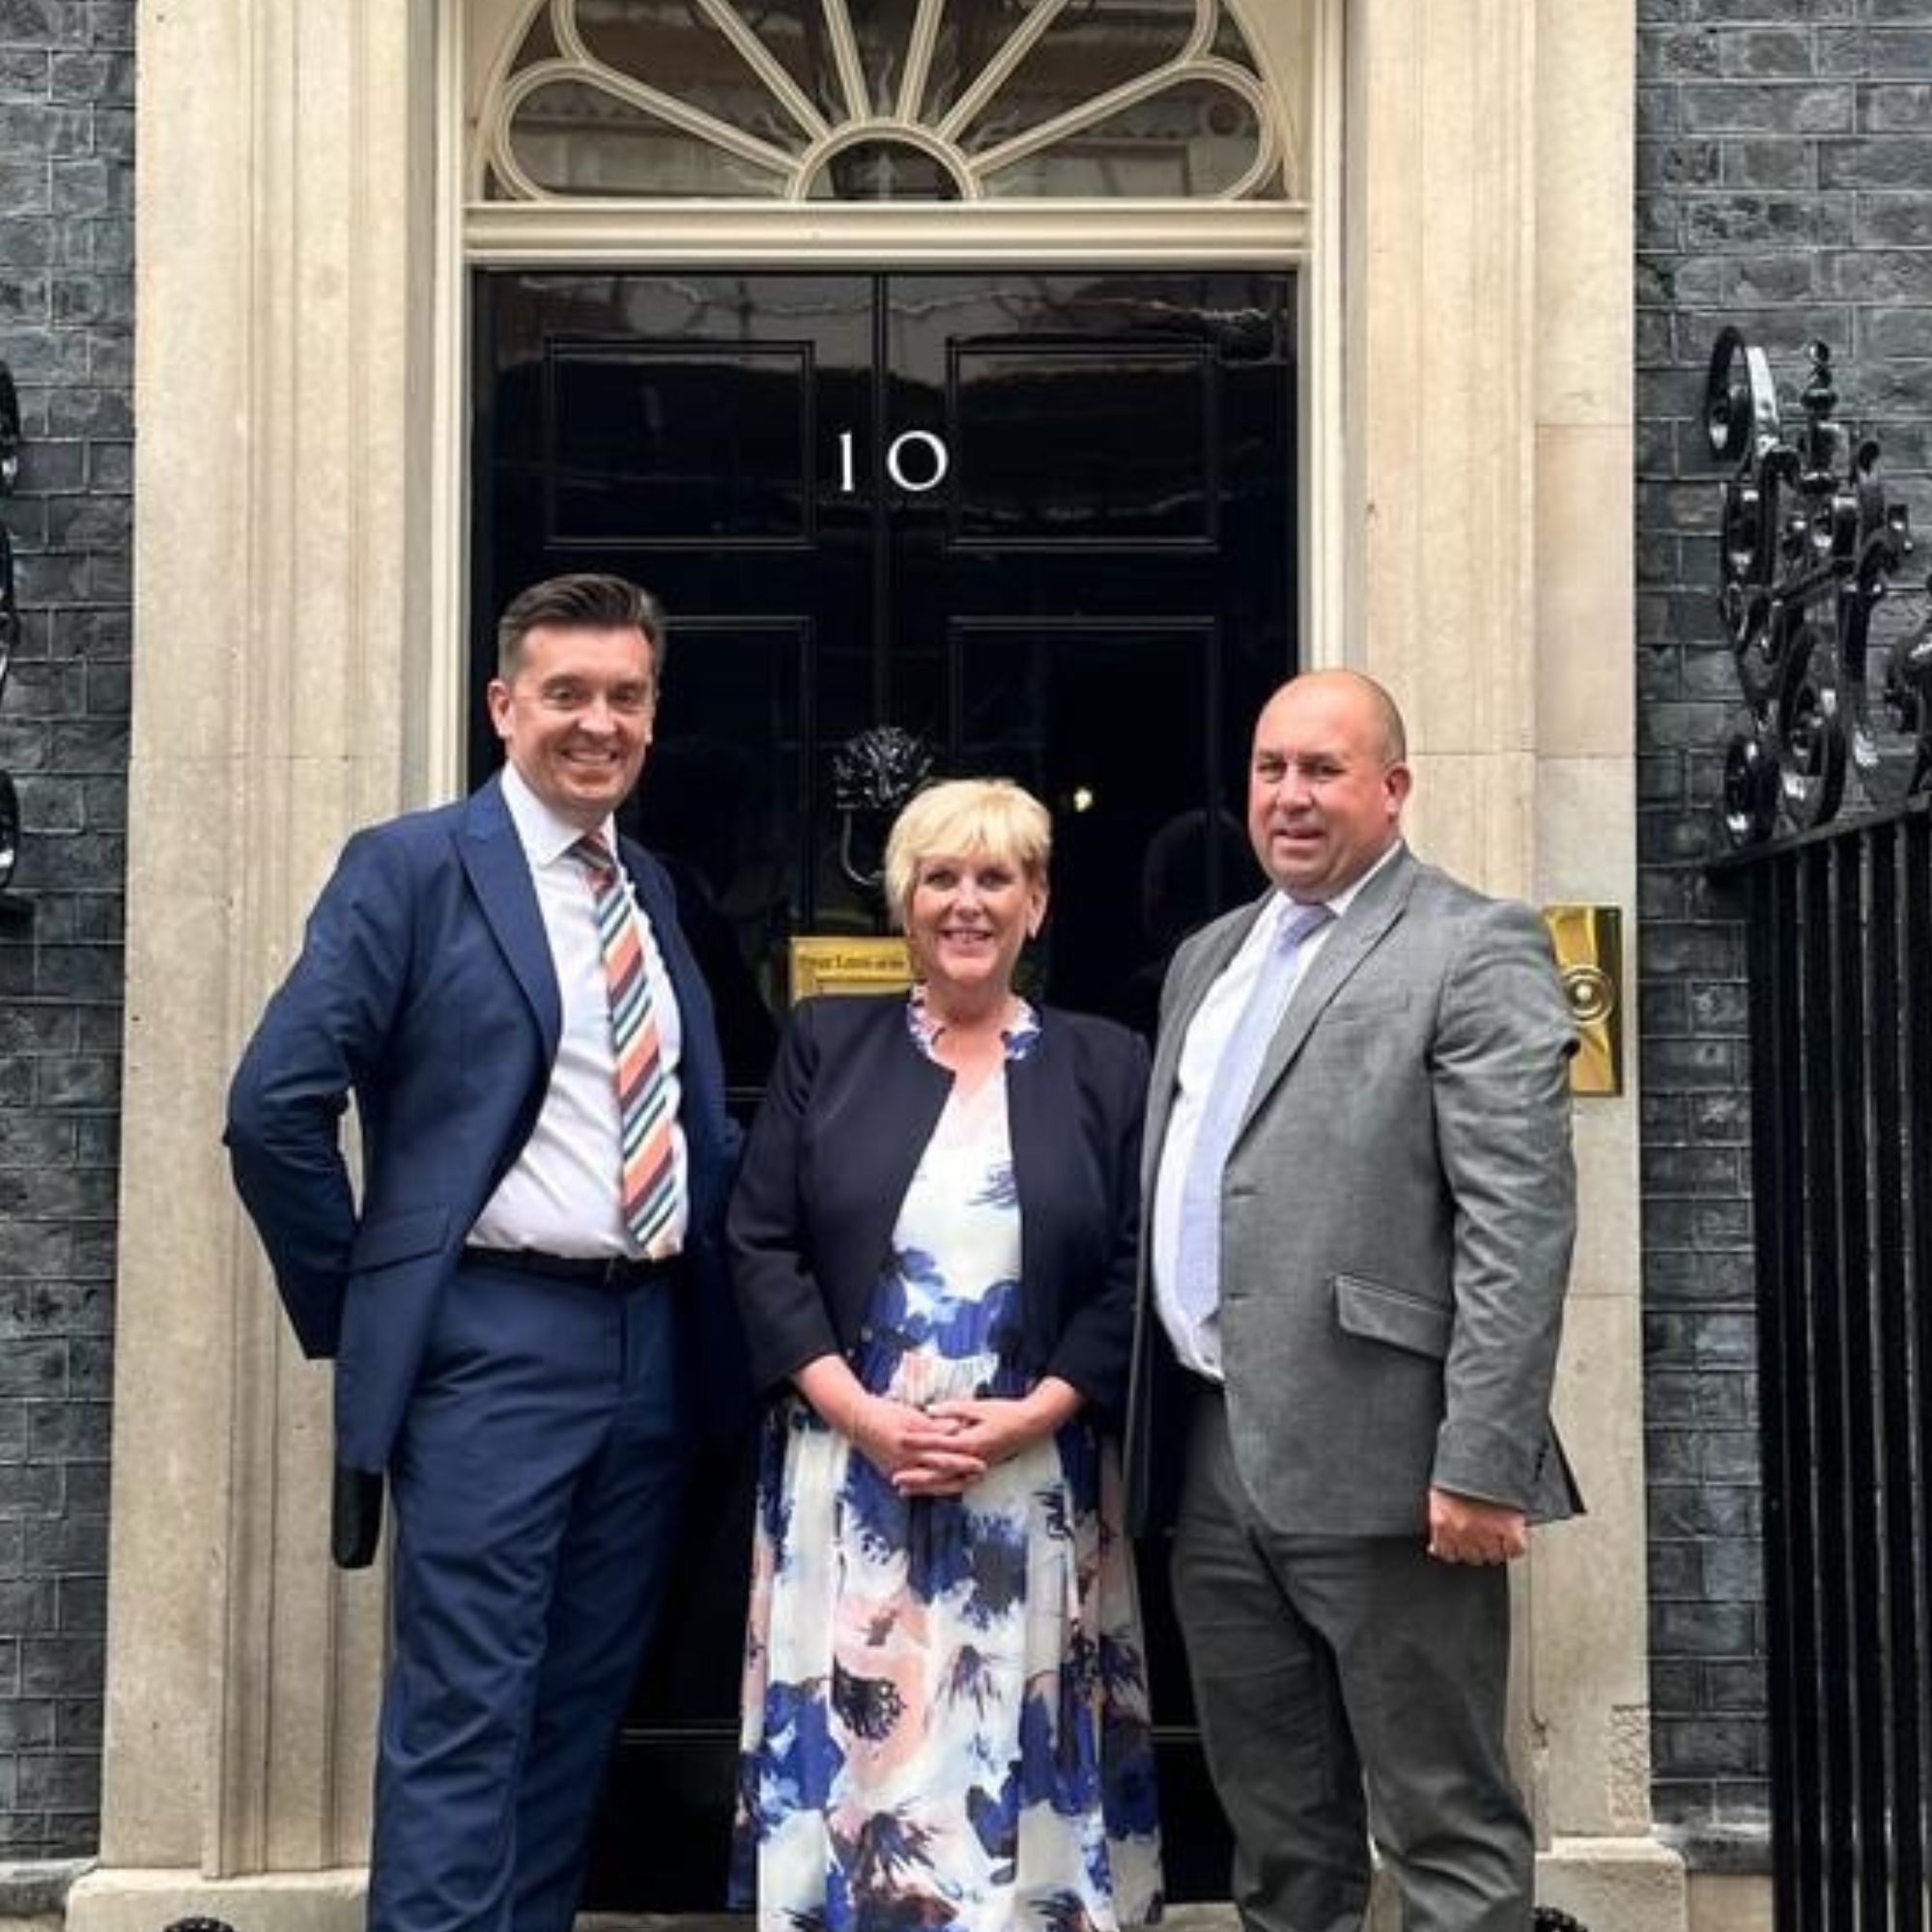 Graham, Mary and Mark at Number 10